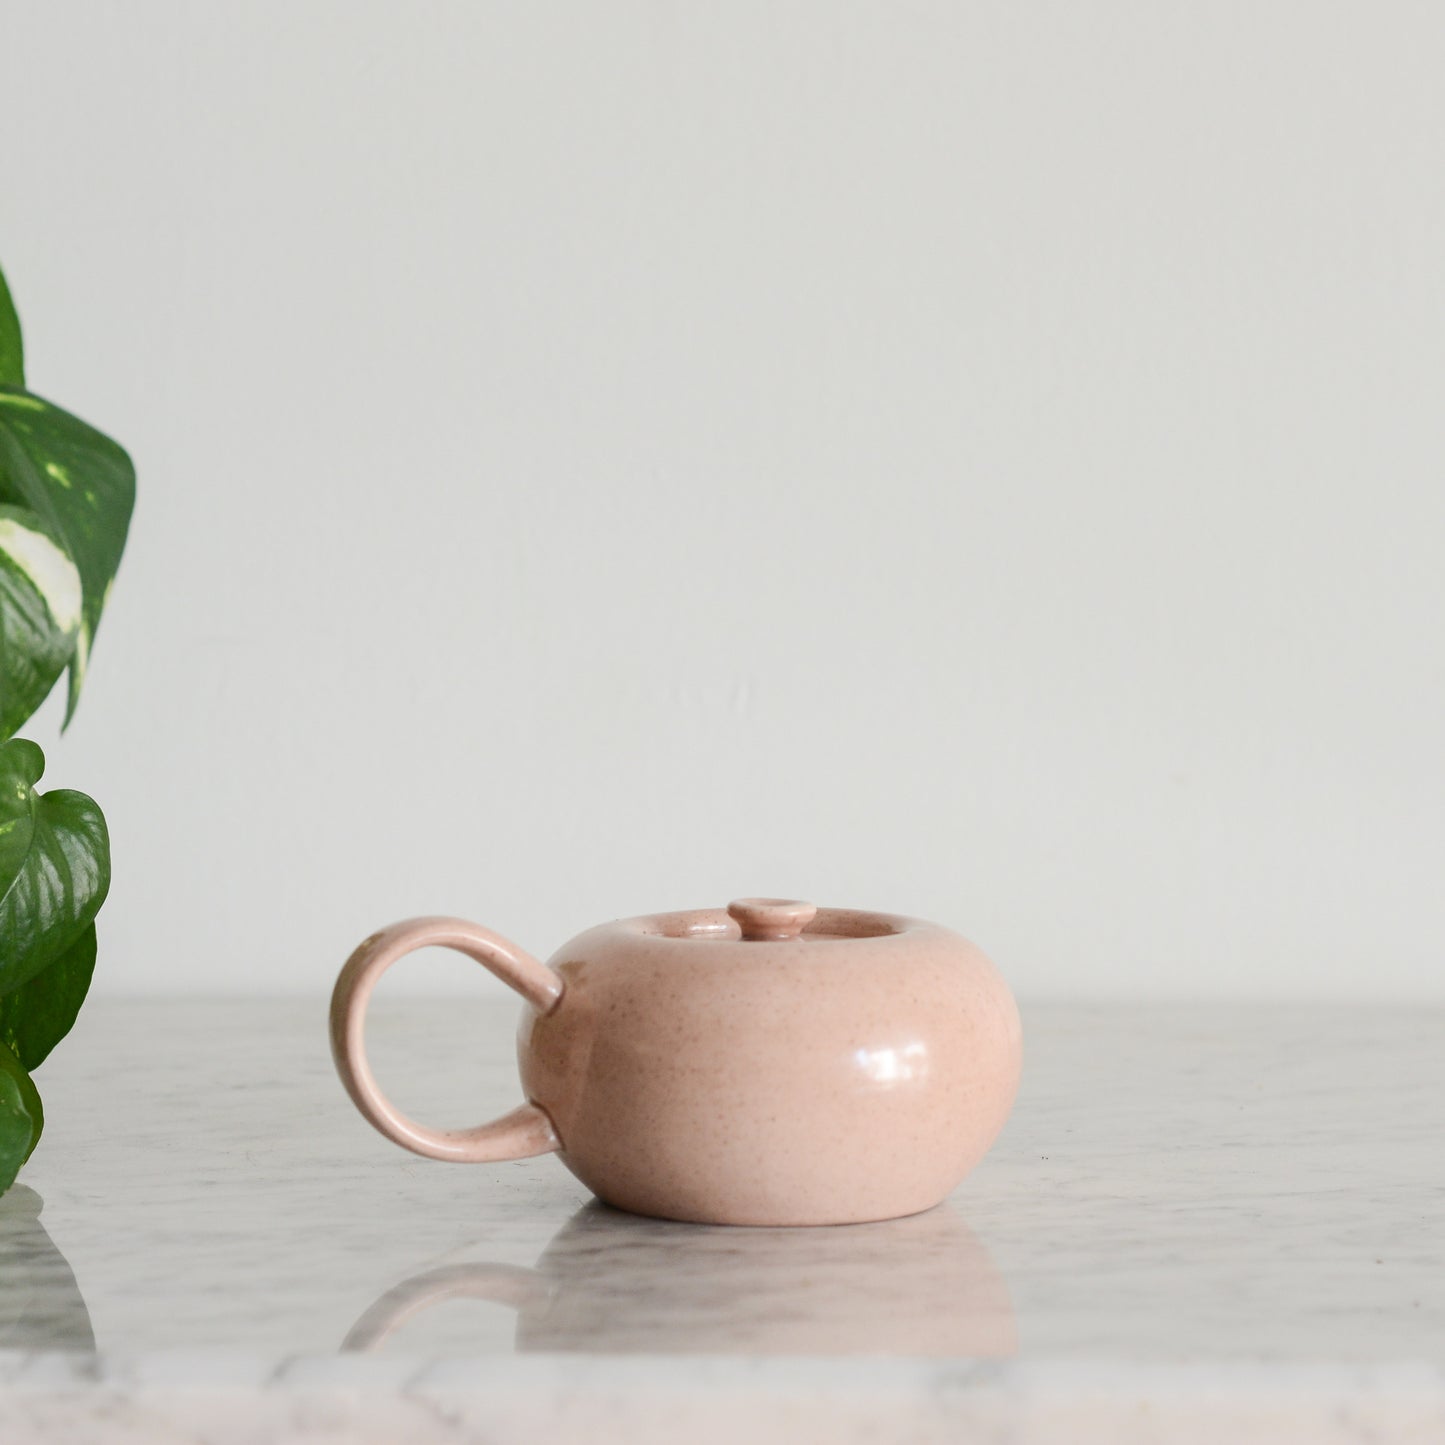 Vintage Pink Sugar Bowl by Russel Wright